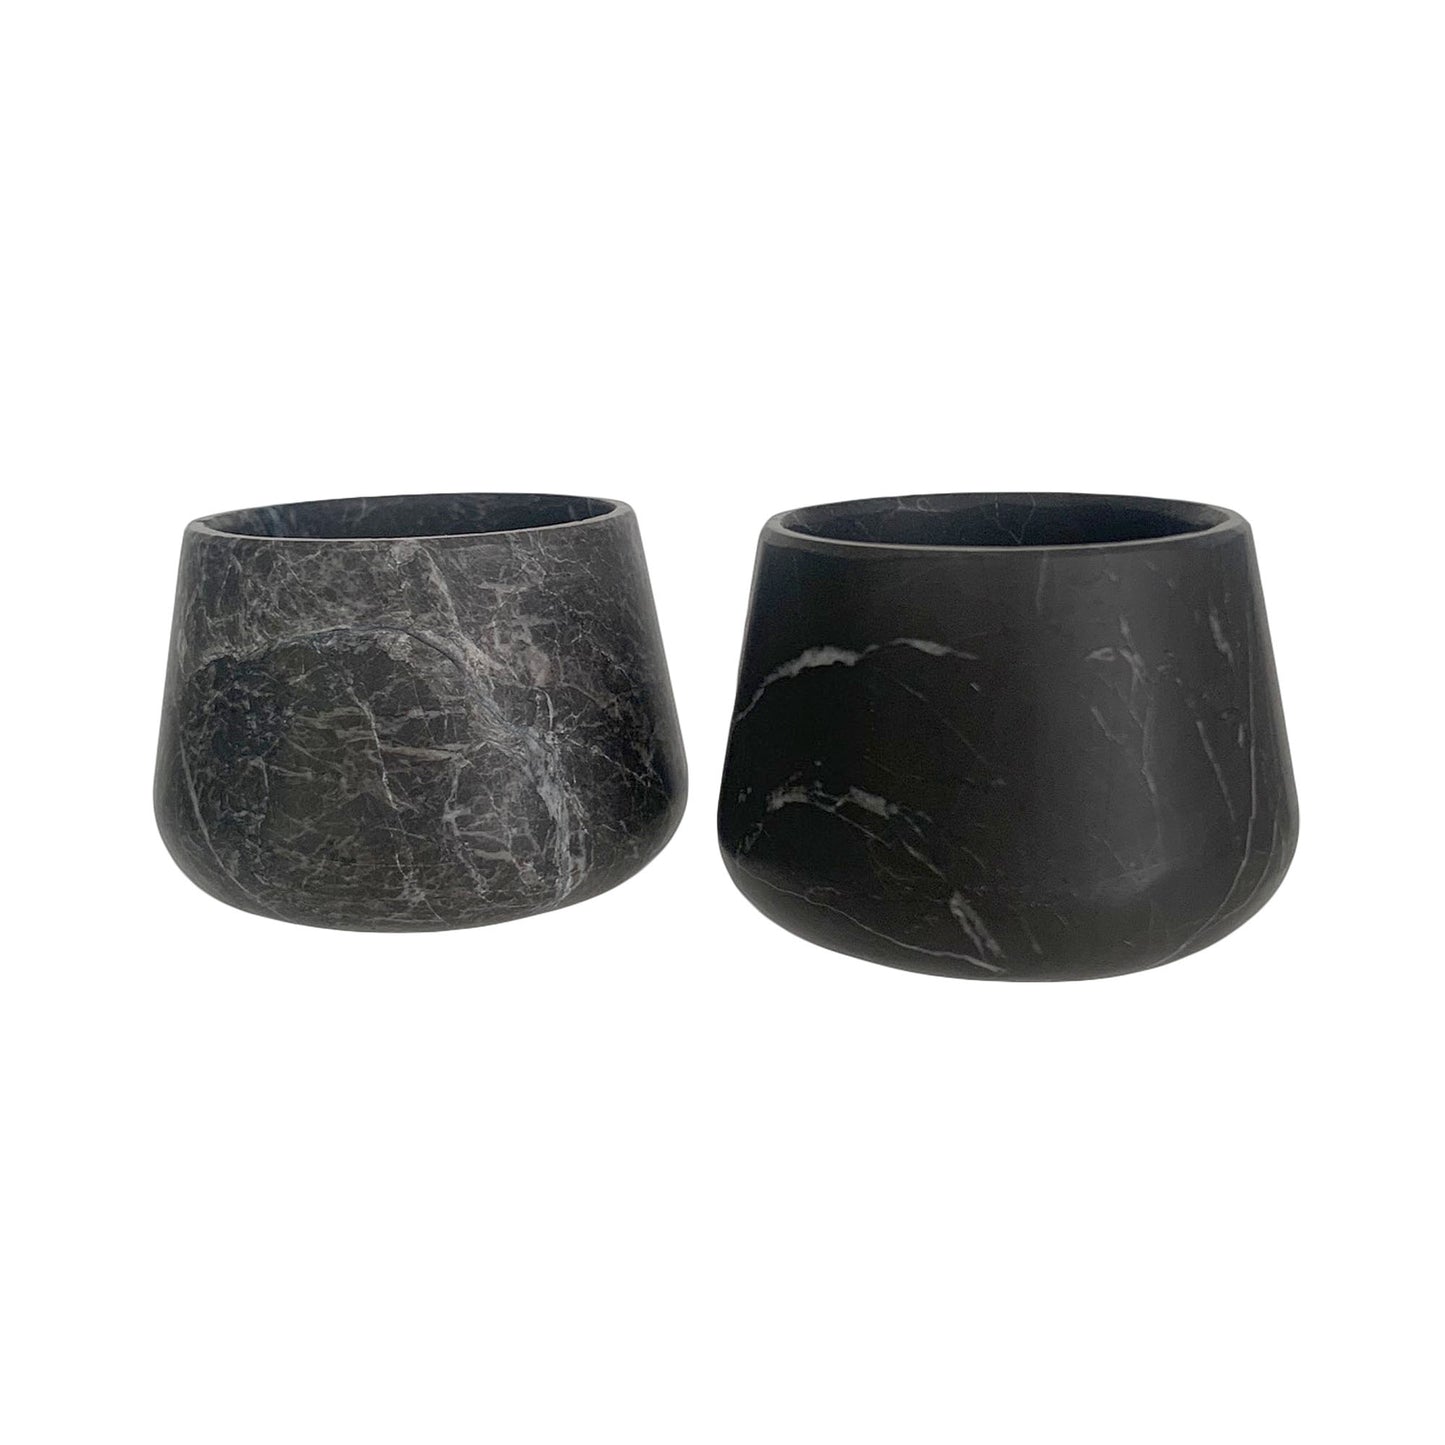 Marble Mezcal Copitas | Stone Shot Glasses | Handmade Mexican Mezcaleros - Available in Black, Gray or Beige